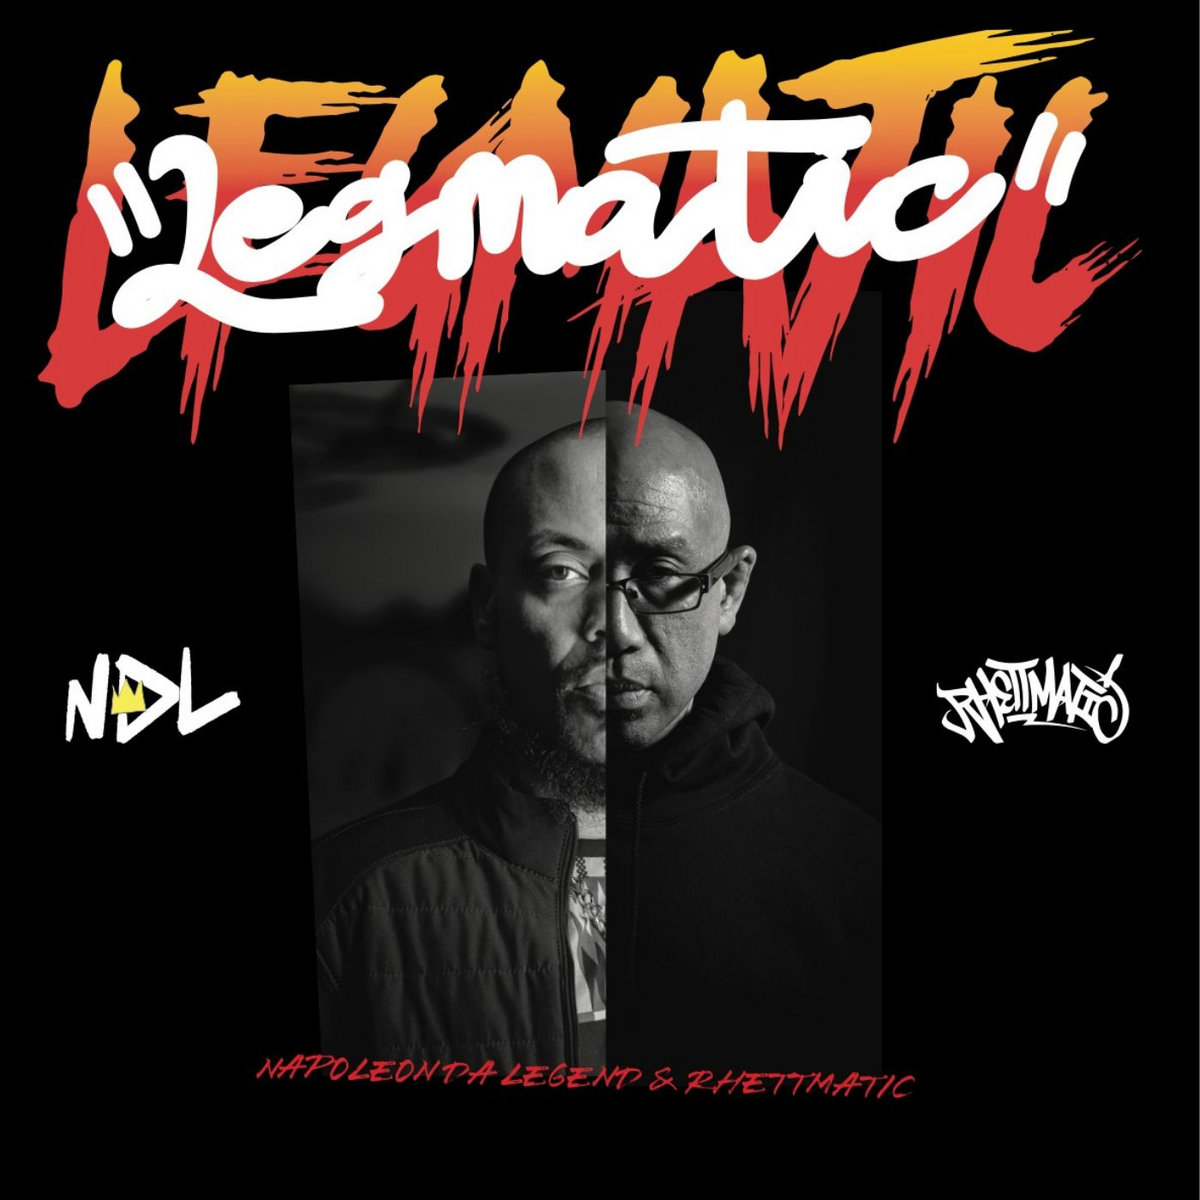 'LEGMATIC' @TeamNDL x @rhettmatic New Friday, new Napoleon Da Legend release yo! This time NDL joins forces with Rhettmatic of the legendary Beat Junkies! Don't miss the vinyl drop at Perpetual Stew's Bandcamp page today at 9am PST 👀 👉🏾 napoleondalegend.bandcamp.com/album/legmatic